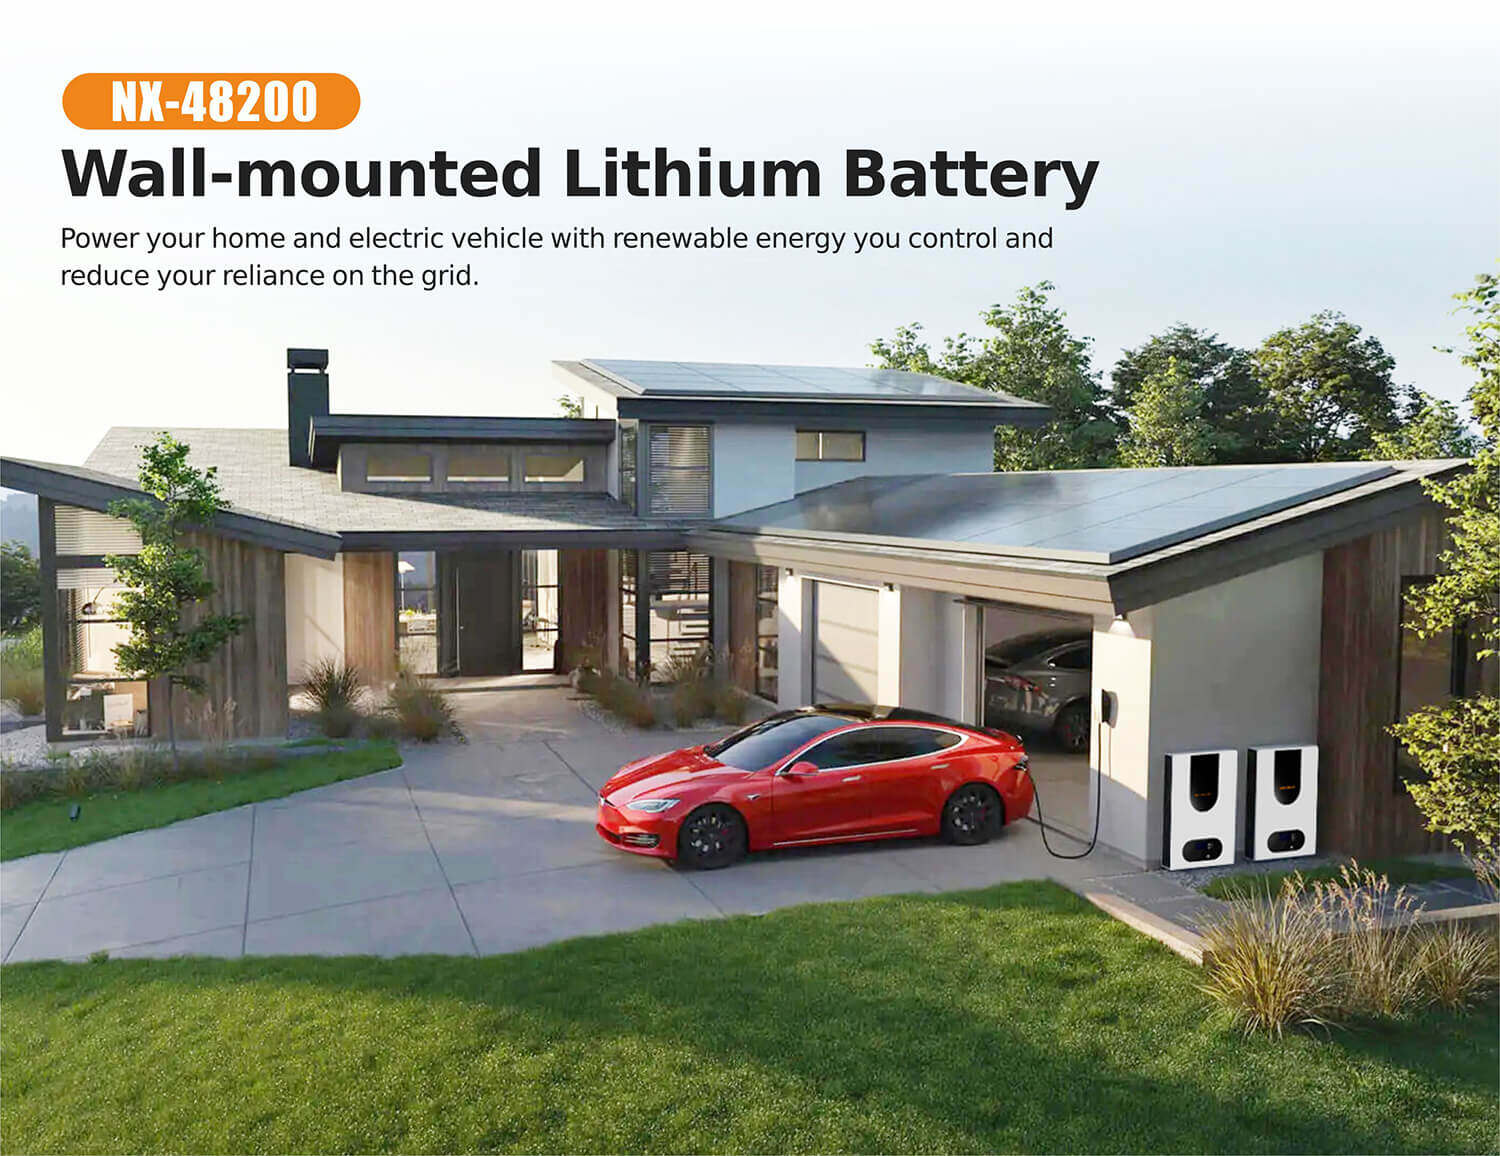 10kw lithium battery